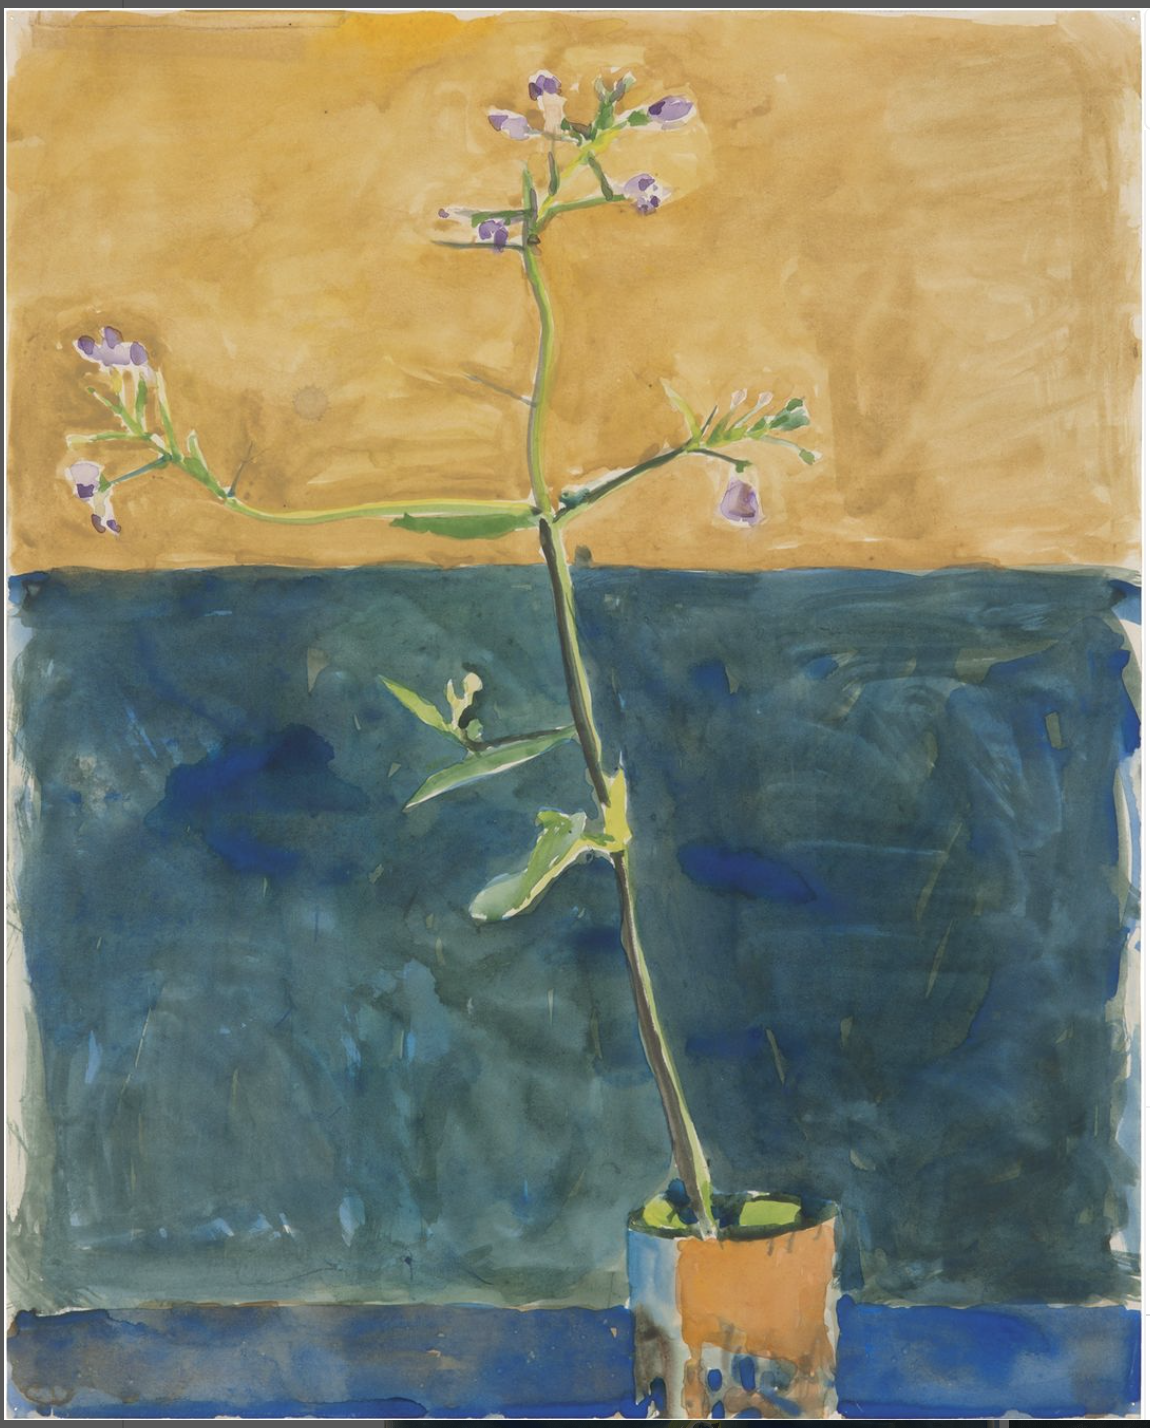 Painting of single-stem flower against a blue-green and yellow background.